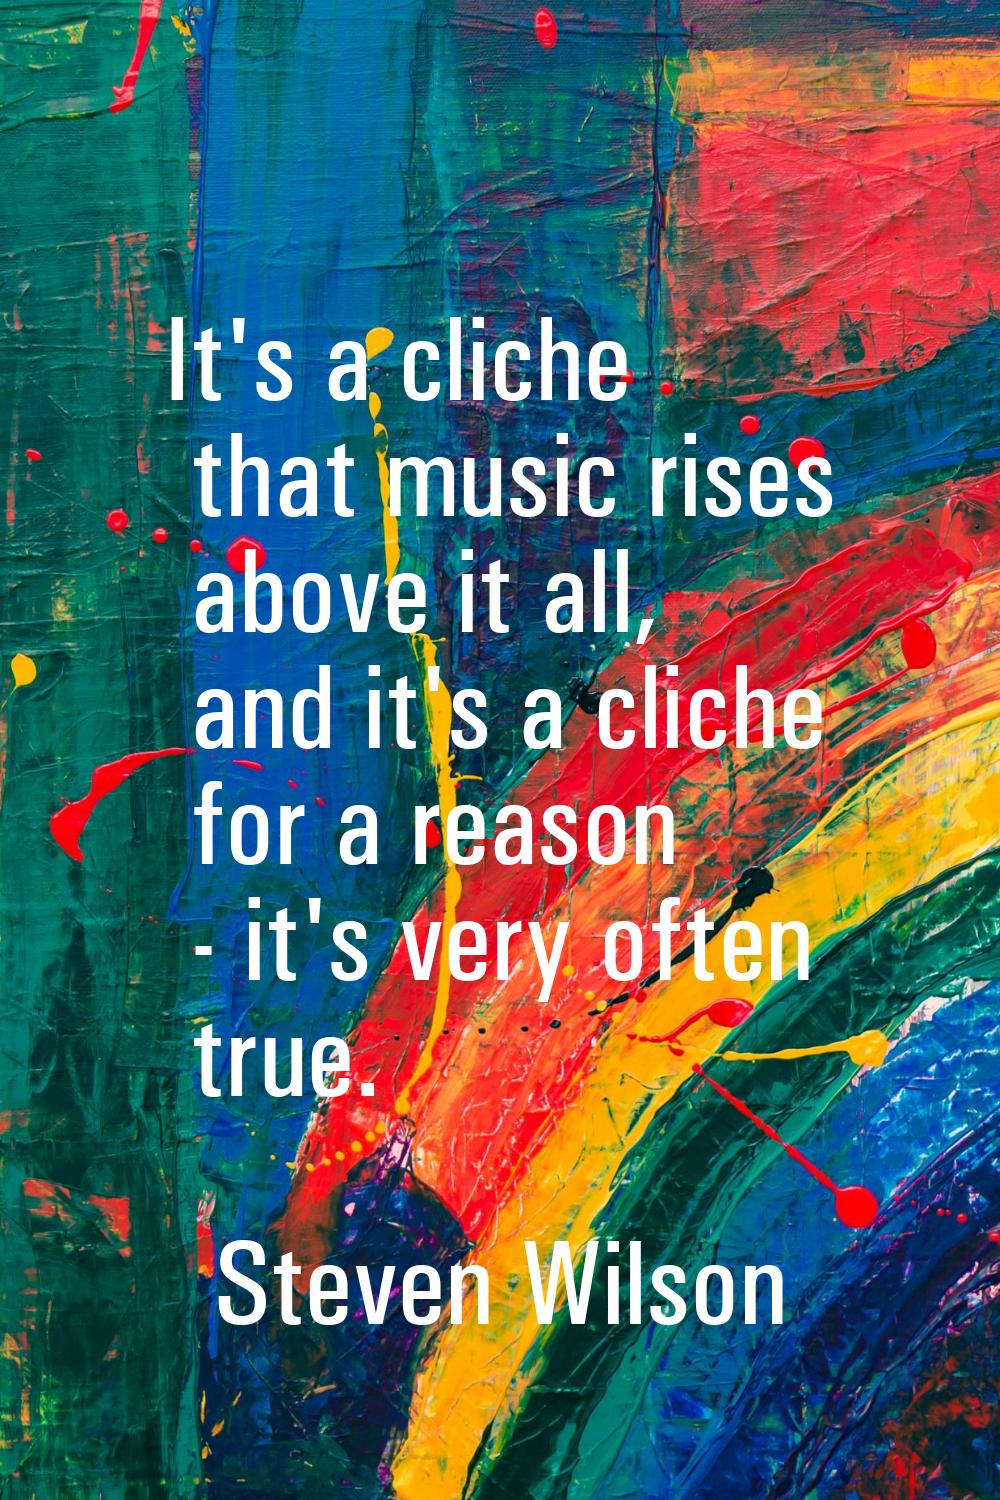 It's a cliche that music rises above it all, and it's a cliche for a reason - it's very often true.